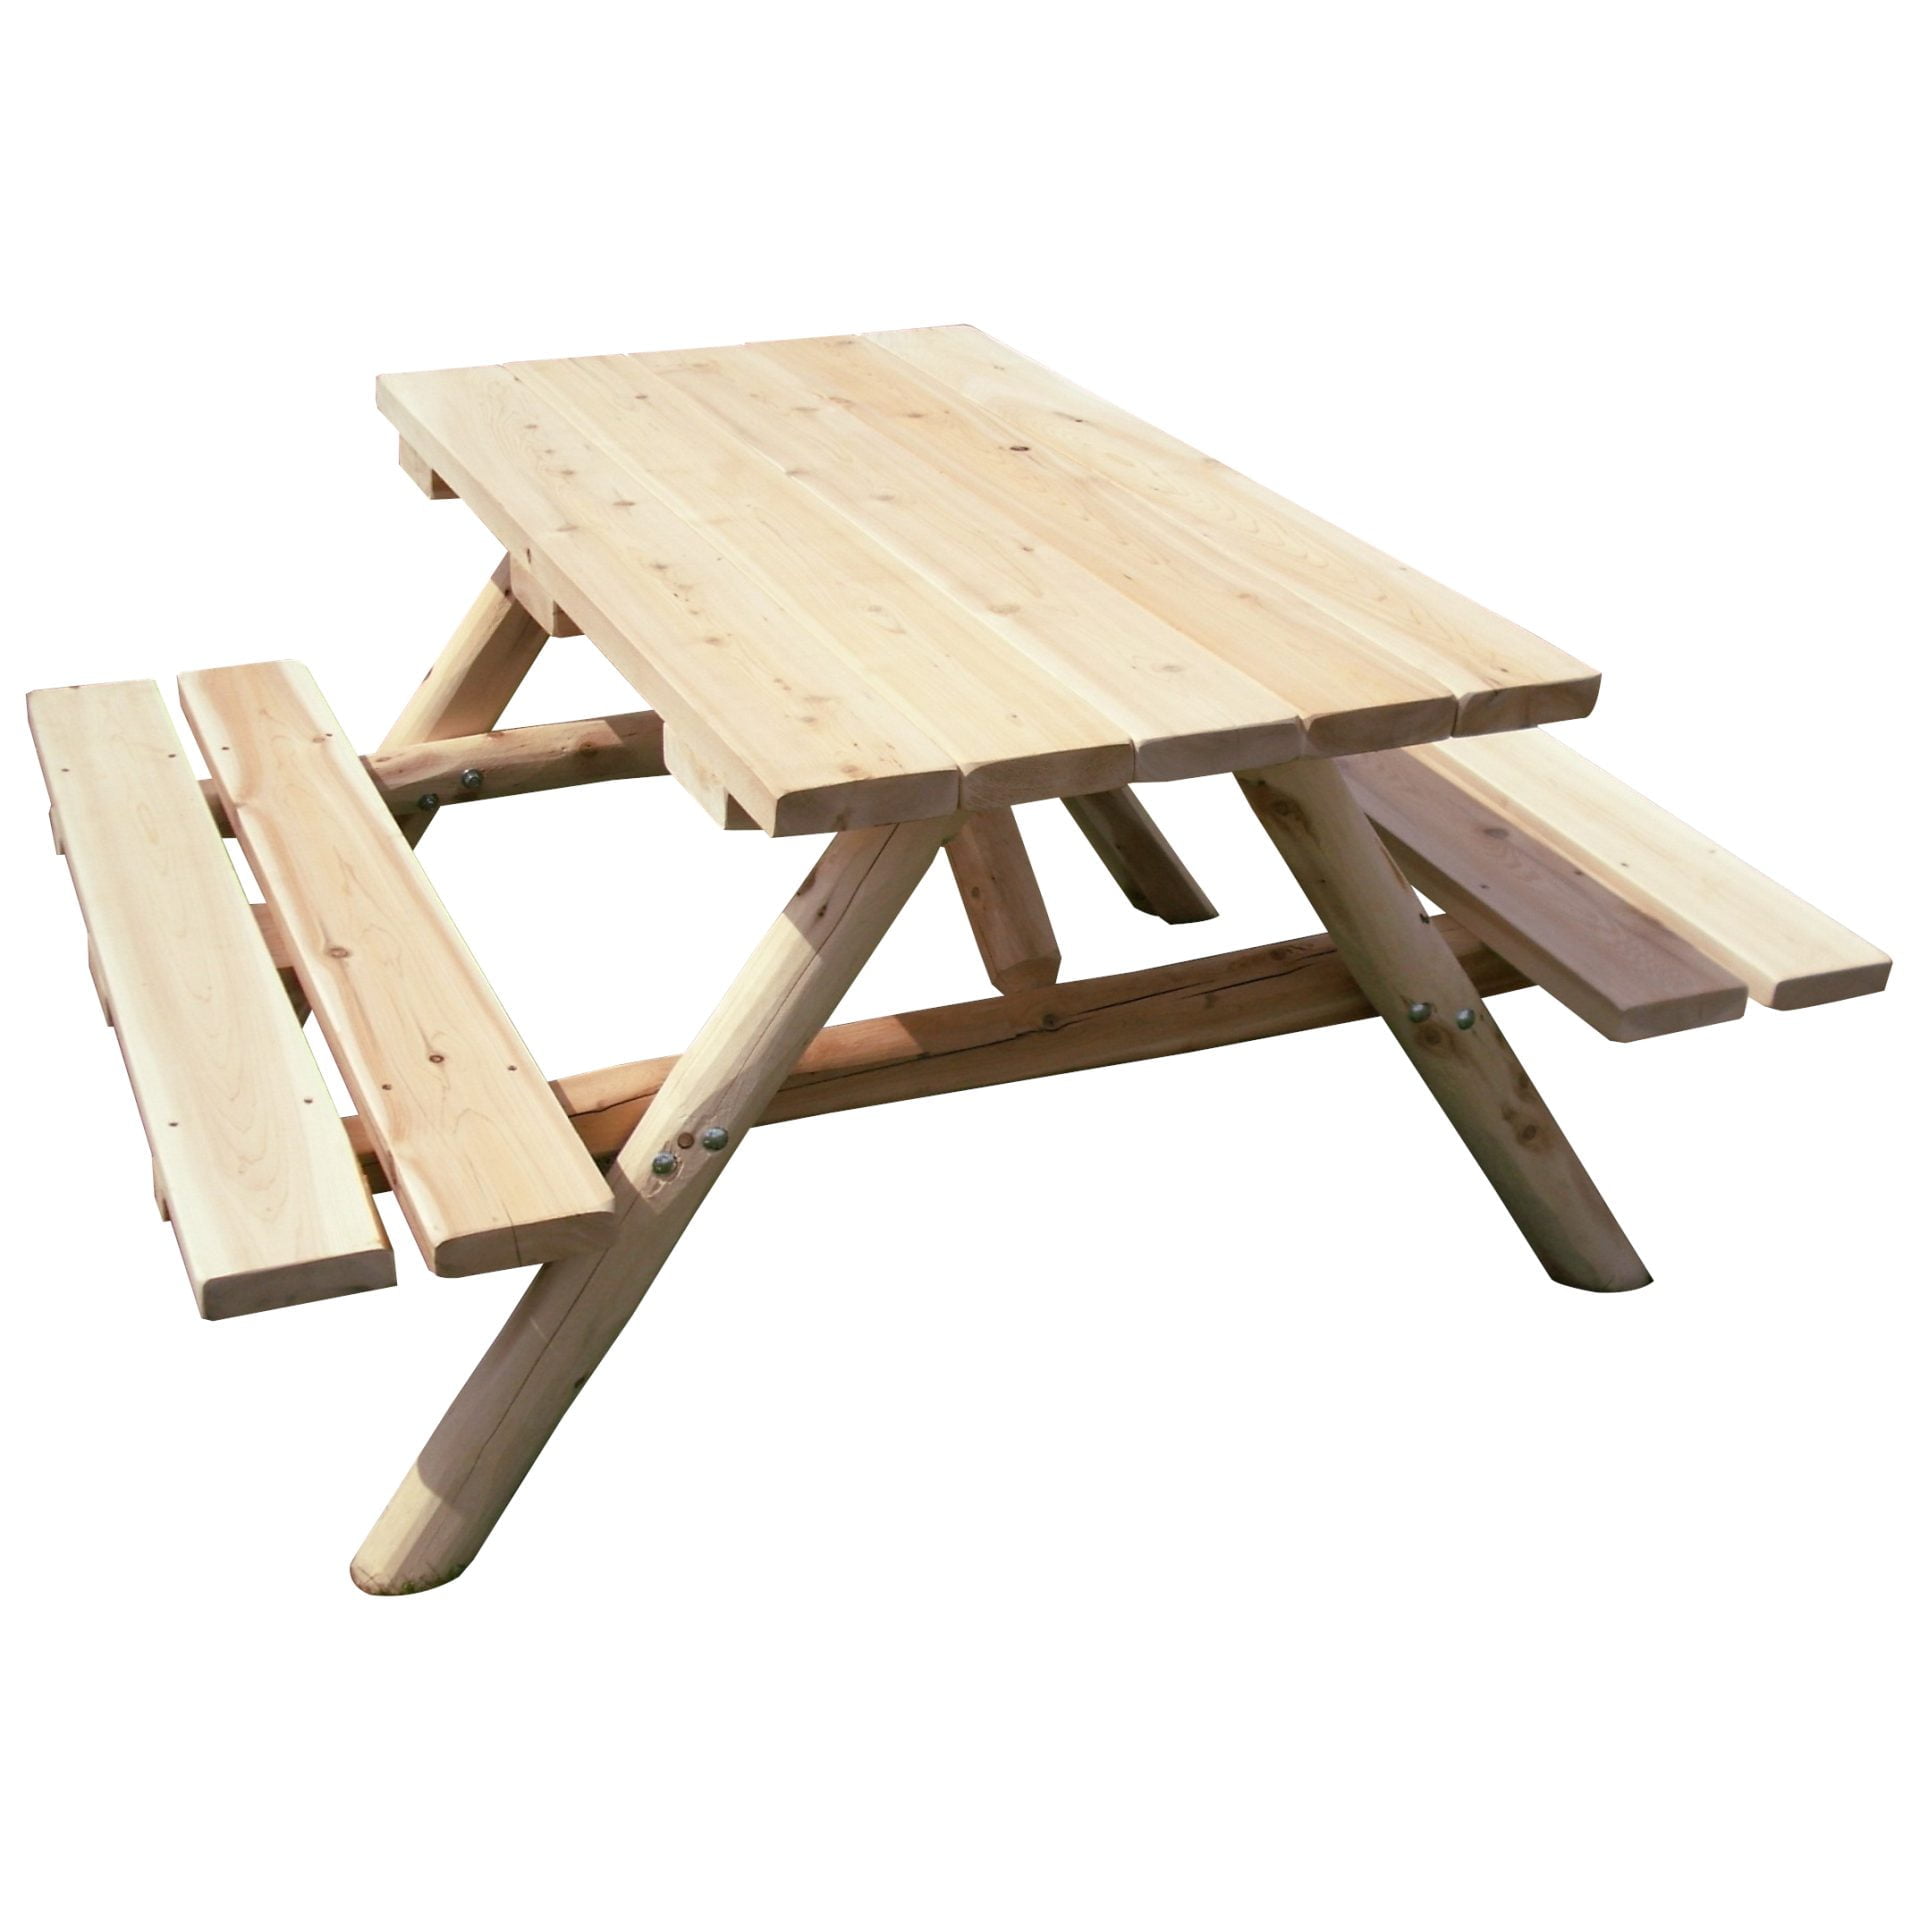 Outdoor White Cedar Log Picnic Table with Attached Benches